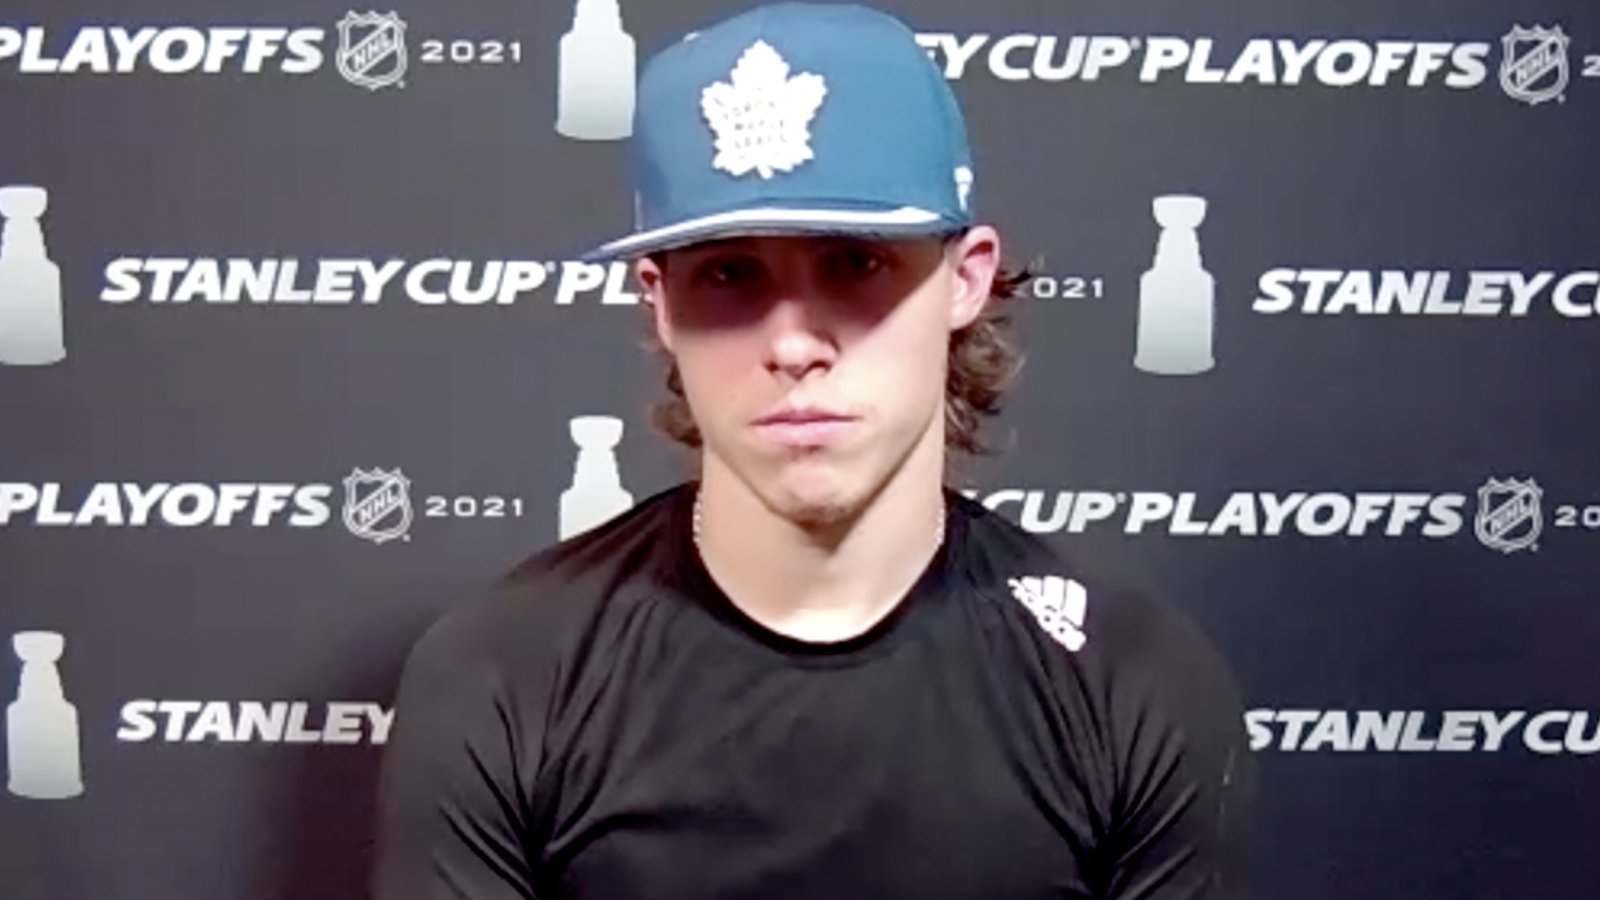 Marner continues to make excuses after Leafs choke in Game 7